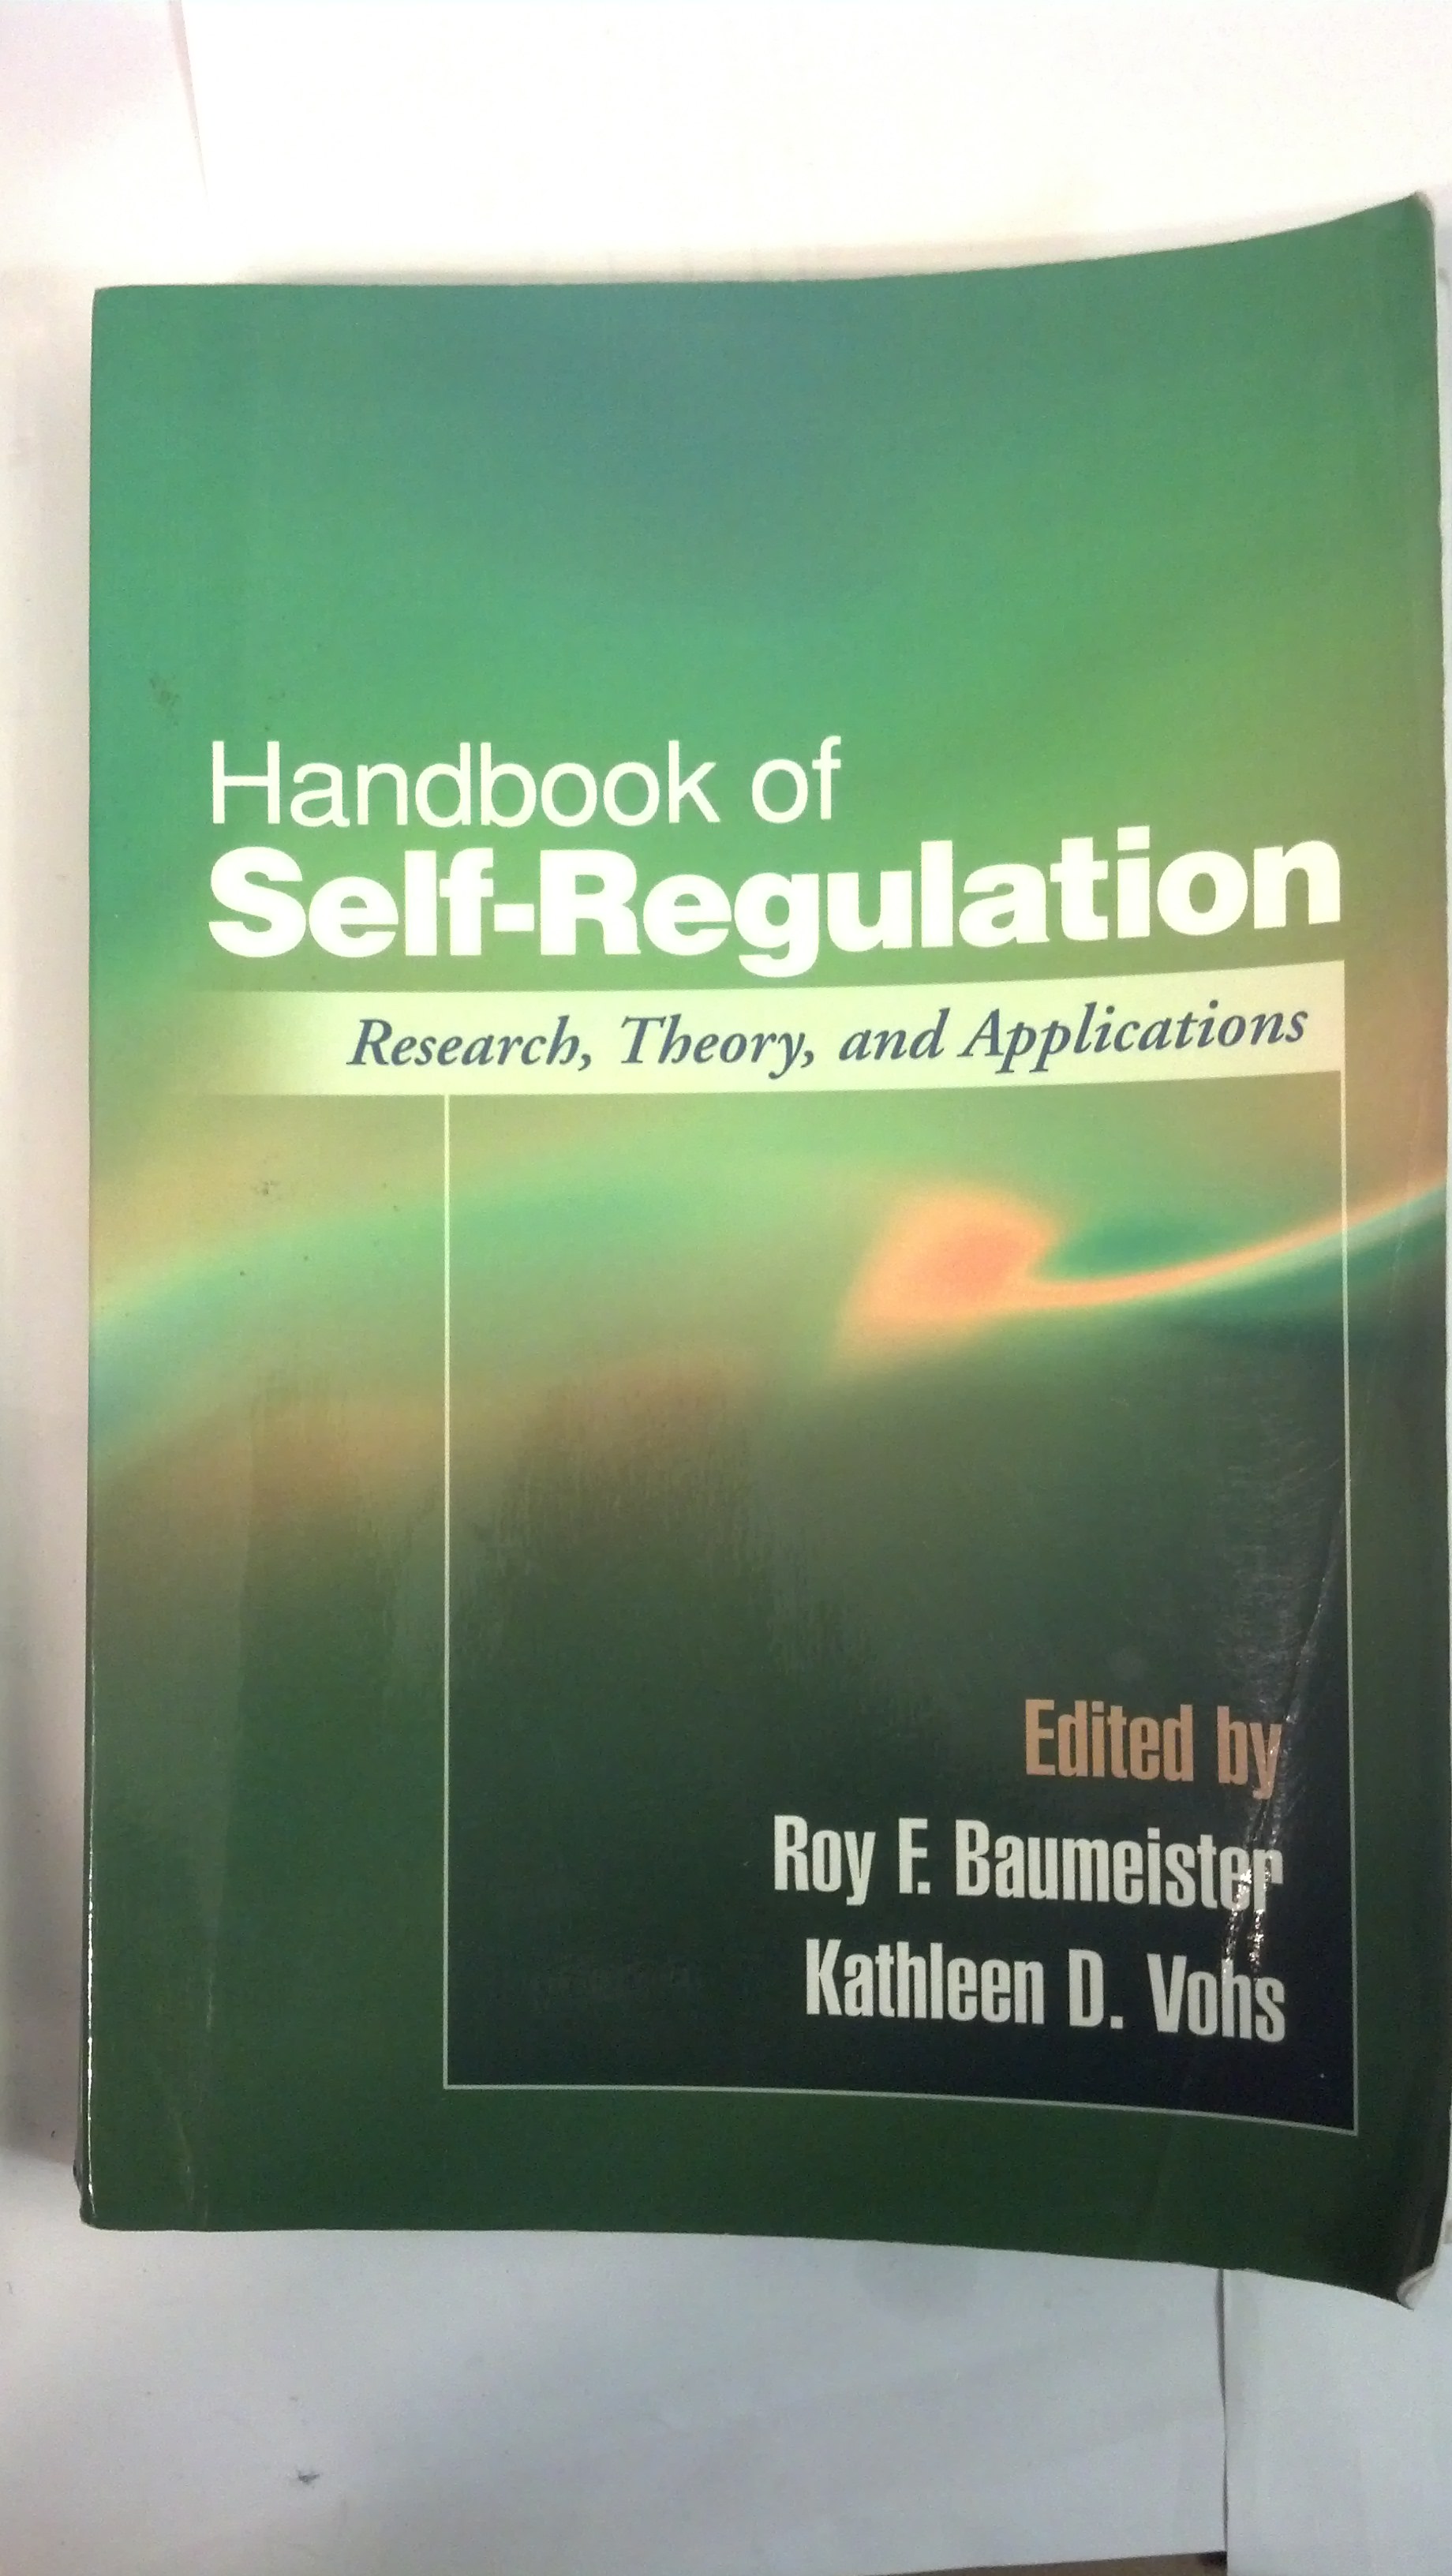 Handbook of Self-Regulation: Research, Theory, and Applications - Baumeister, Roy F.; Vohs, Kathleen